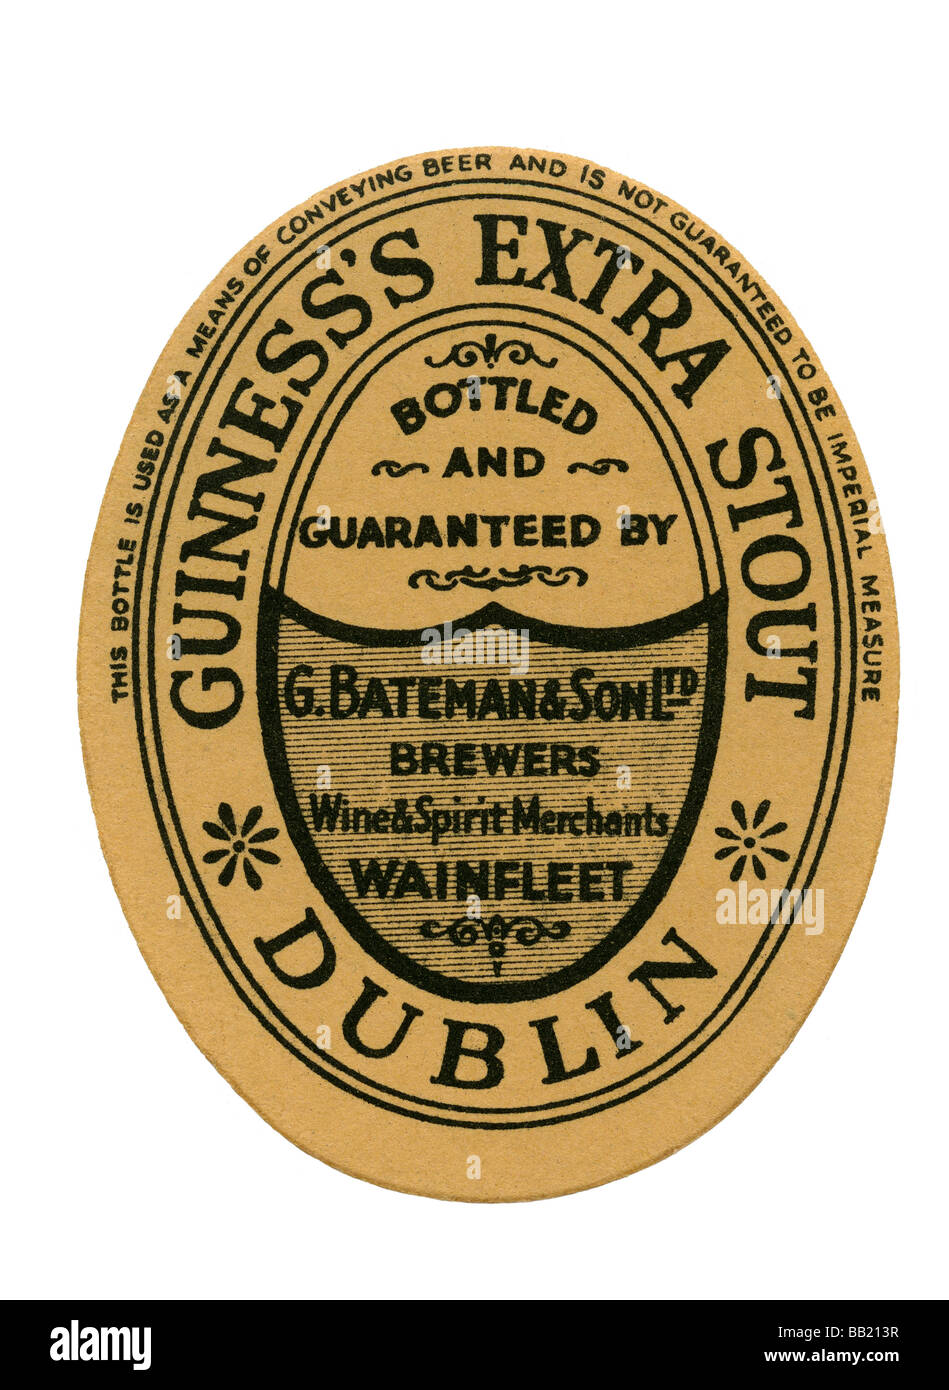 Old Guinness label for Extra Stout, bottled by Bateman's of Wainfleet, Lincolnshire Stock Photo